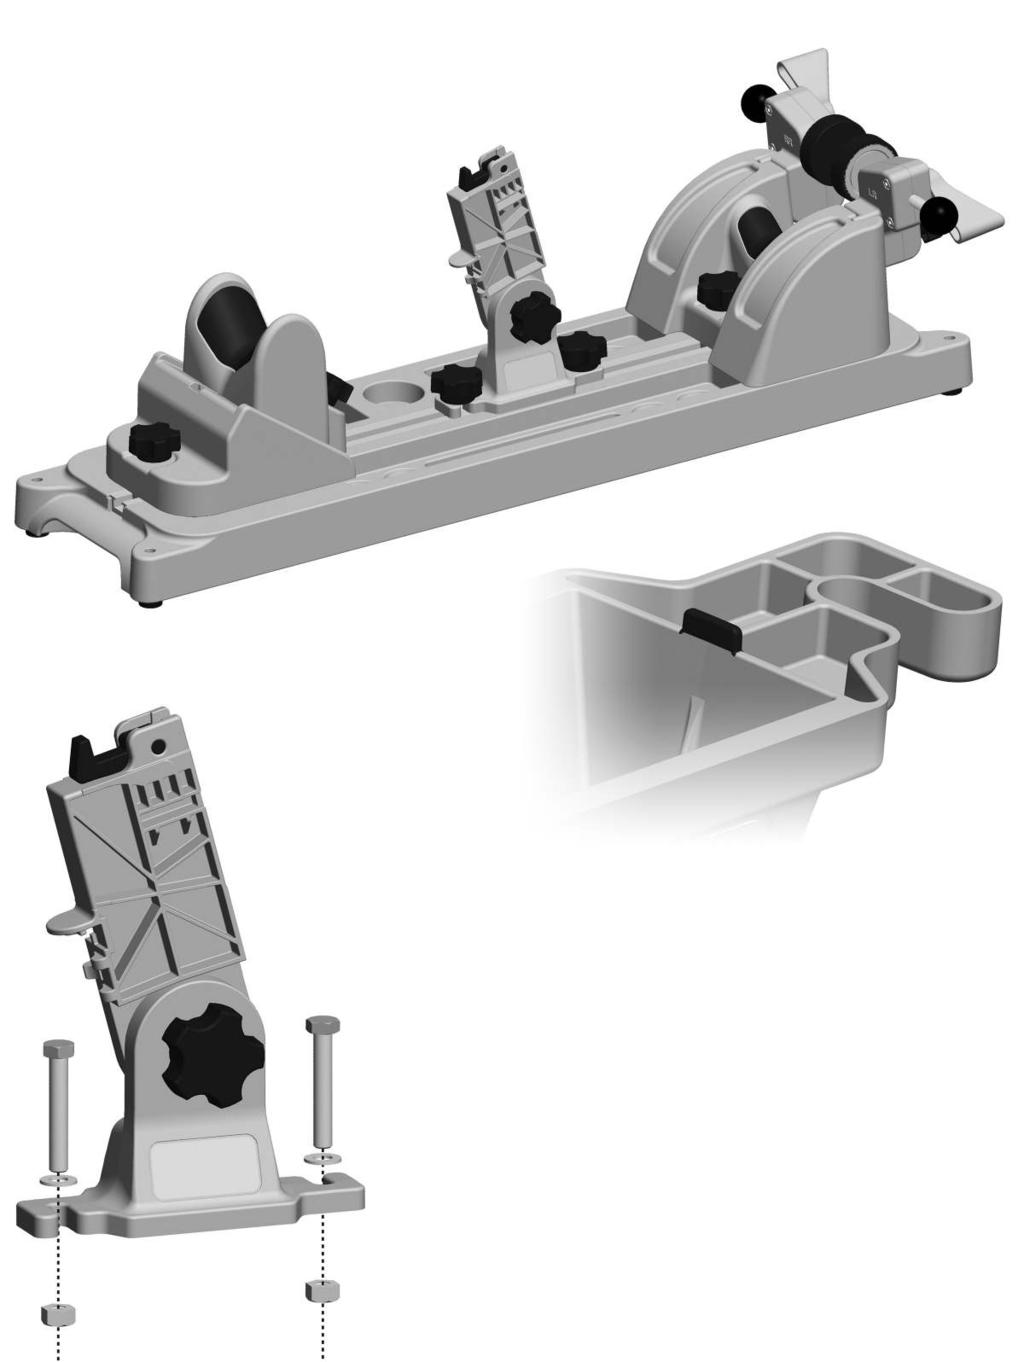 BEST GUN VISE USAGE: The AR-15 Mag well is designed to mount anywhere along the T-Rail of the Tipton Best Gun Vise.